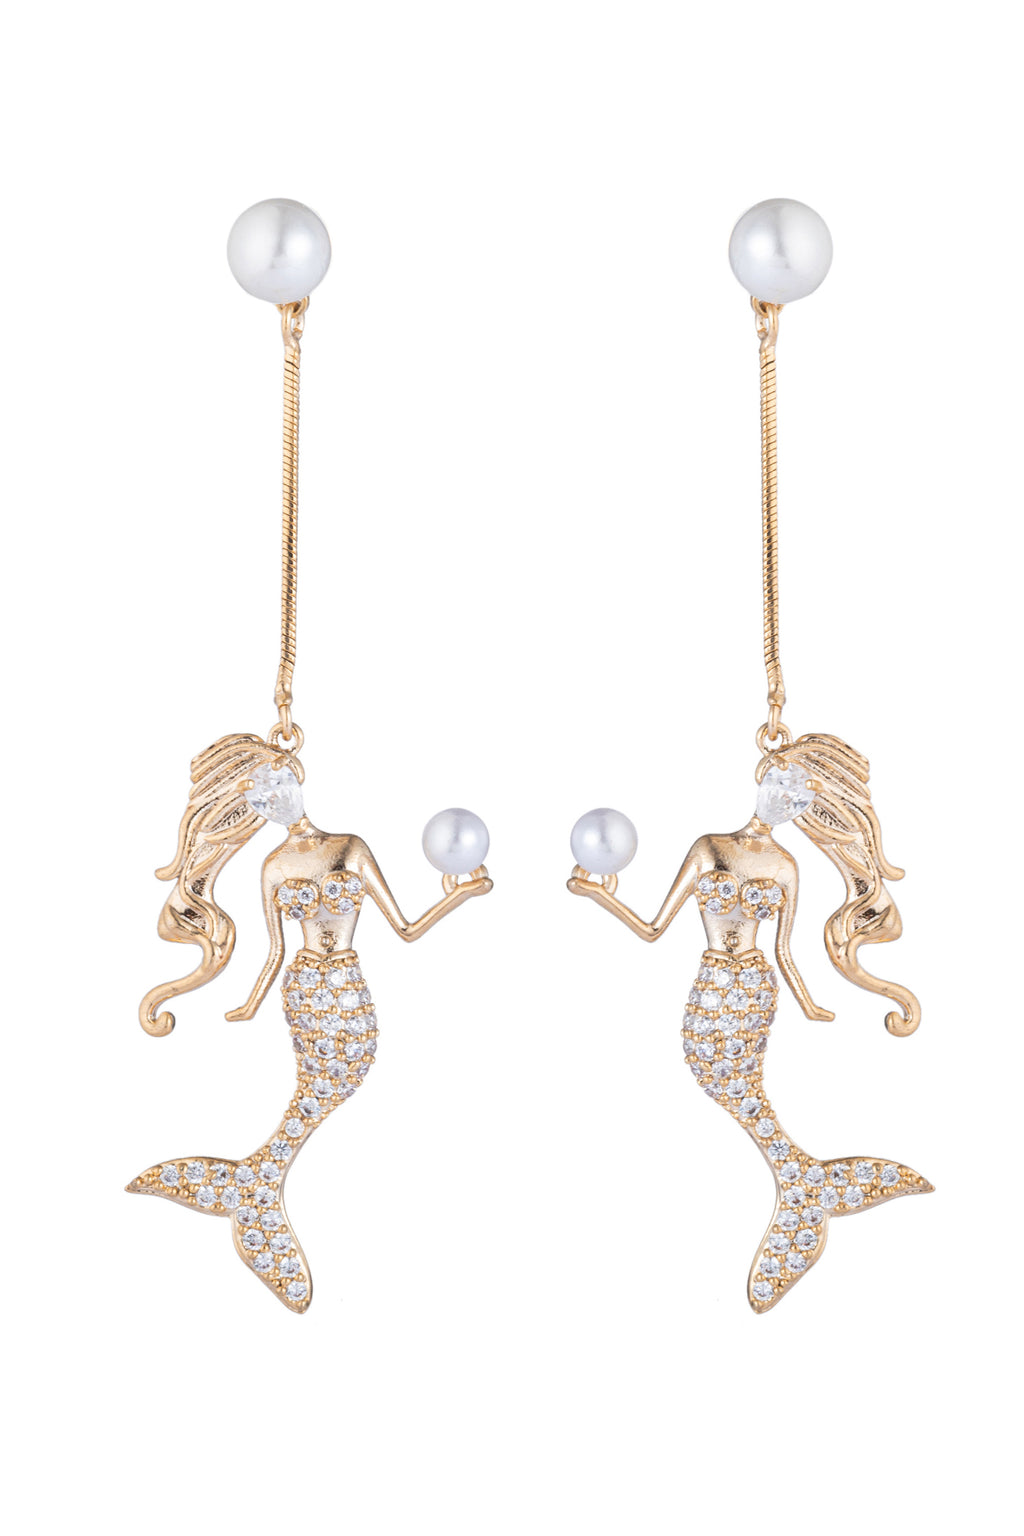 Mermaid drop earrings studded with CZ crystals.